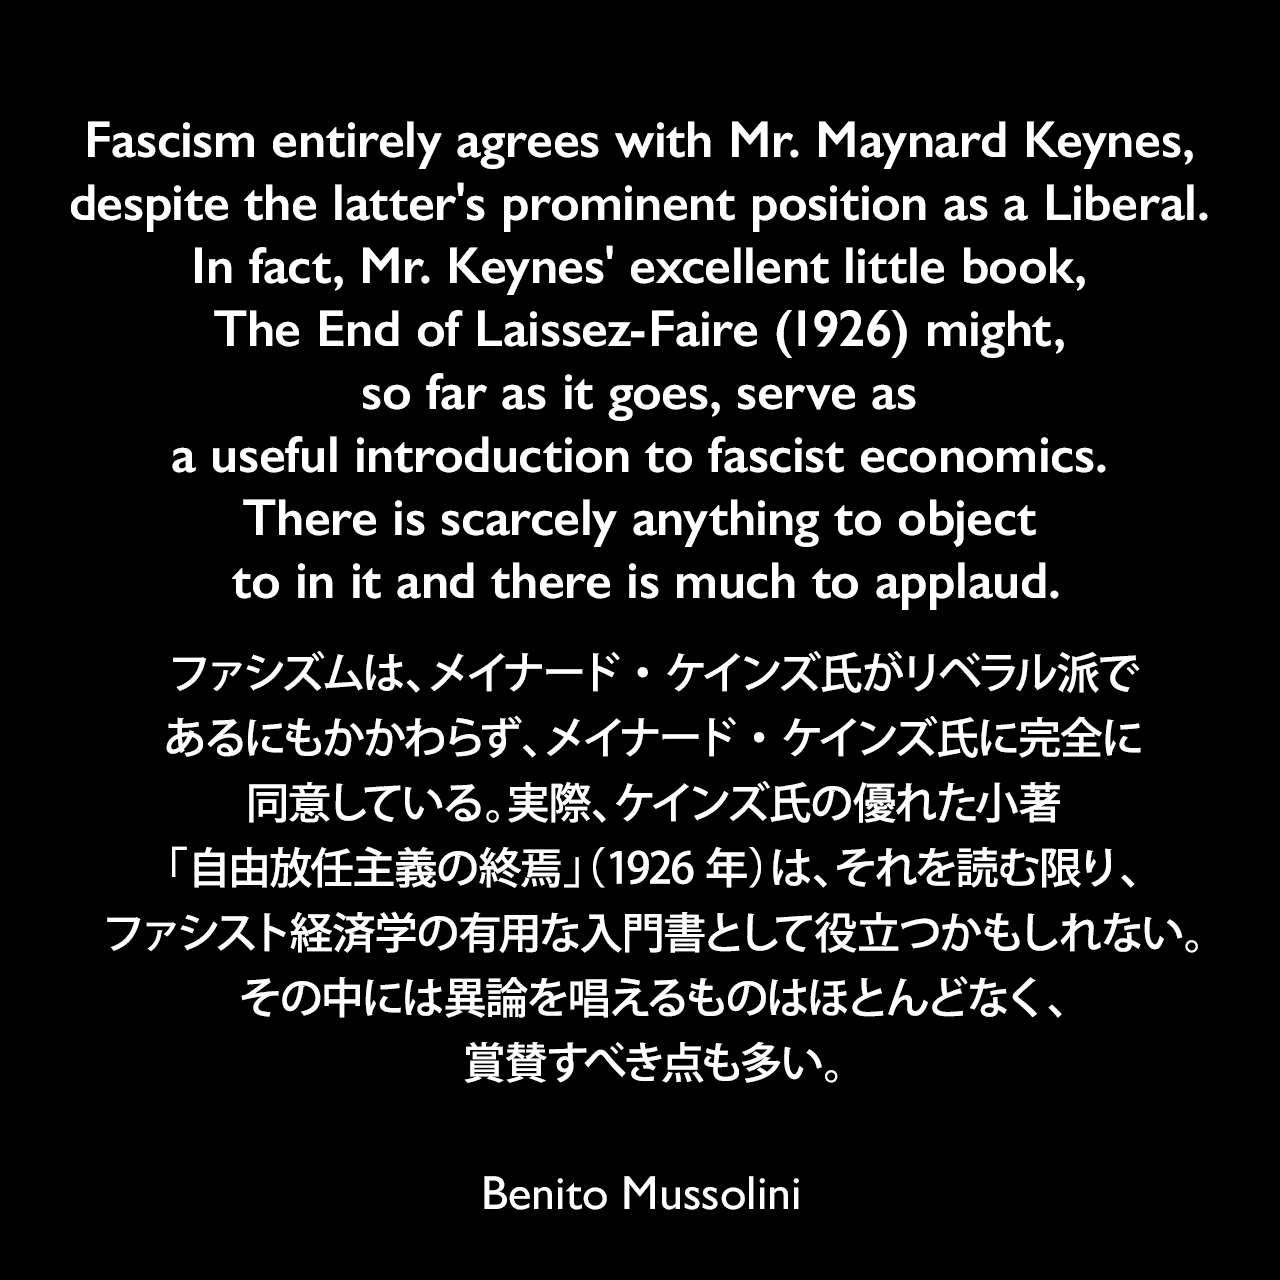 Fascism entirely agrees with Mr. Maynard Keynes, despite the latter's prominent position as a Liberal. In fact, Mr. Keynes' excellent little book, The End of Laissez-Faire (1926) might, so far as it goes, serve as a useful introduction to fascist economics. There is scarcely anything to object to in it and there is much to applaud.ファシズムは、メイナード・ケインズ氏がリベラル派であるにもかかわらず、メイナード・ケインズ氏に完全に同意している。実際、ケインズ氏の優れた小著「自由放任主義の終焉」（1926年）は、それを読む限り、ファシスト経済学の有用な入門書として役立つかもしれない。その中には異論を唱えるものはほとんどなく、賞賛すべき点も多い。- ムッソリーニのケインズの書評である「The Universal Aspects of Fascism & Fascism」よりBenito Mussolini